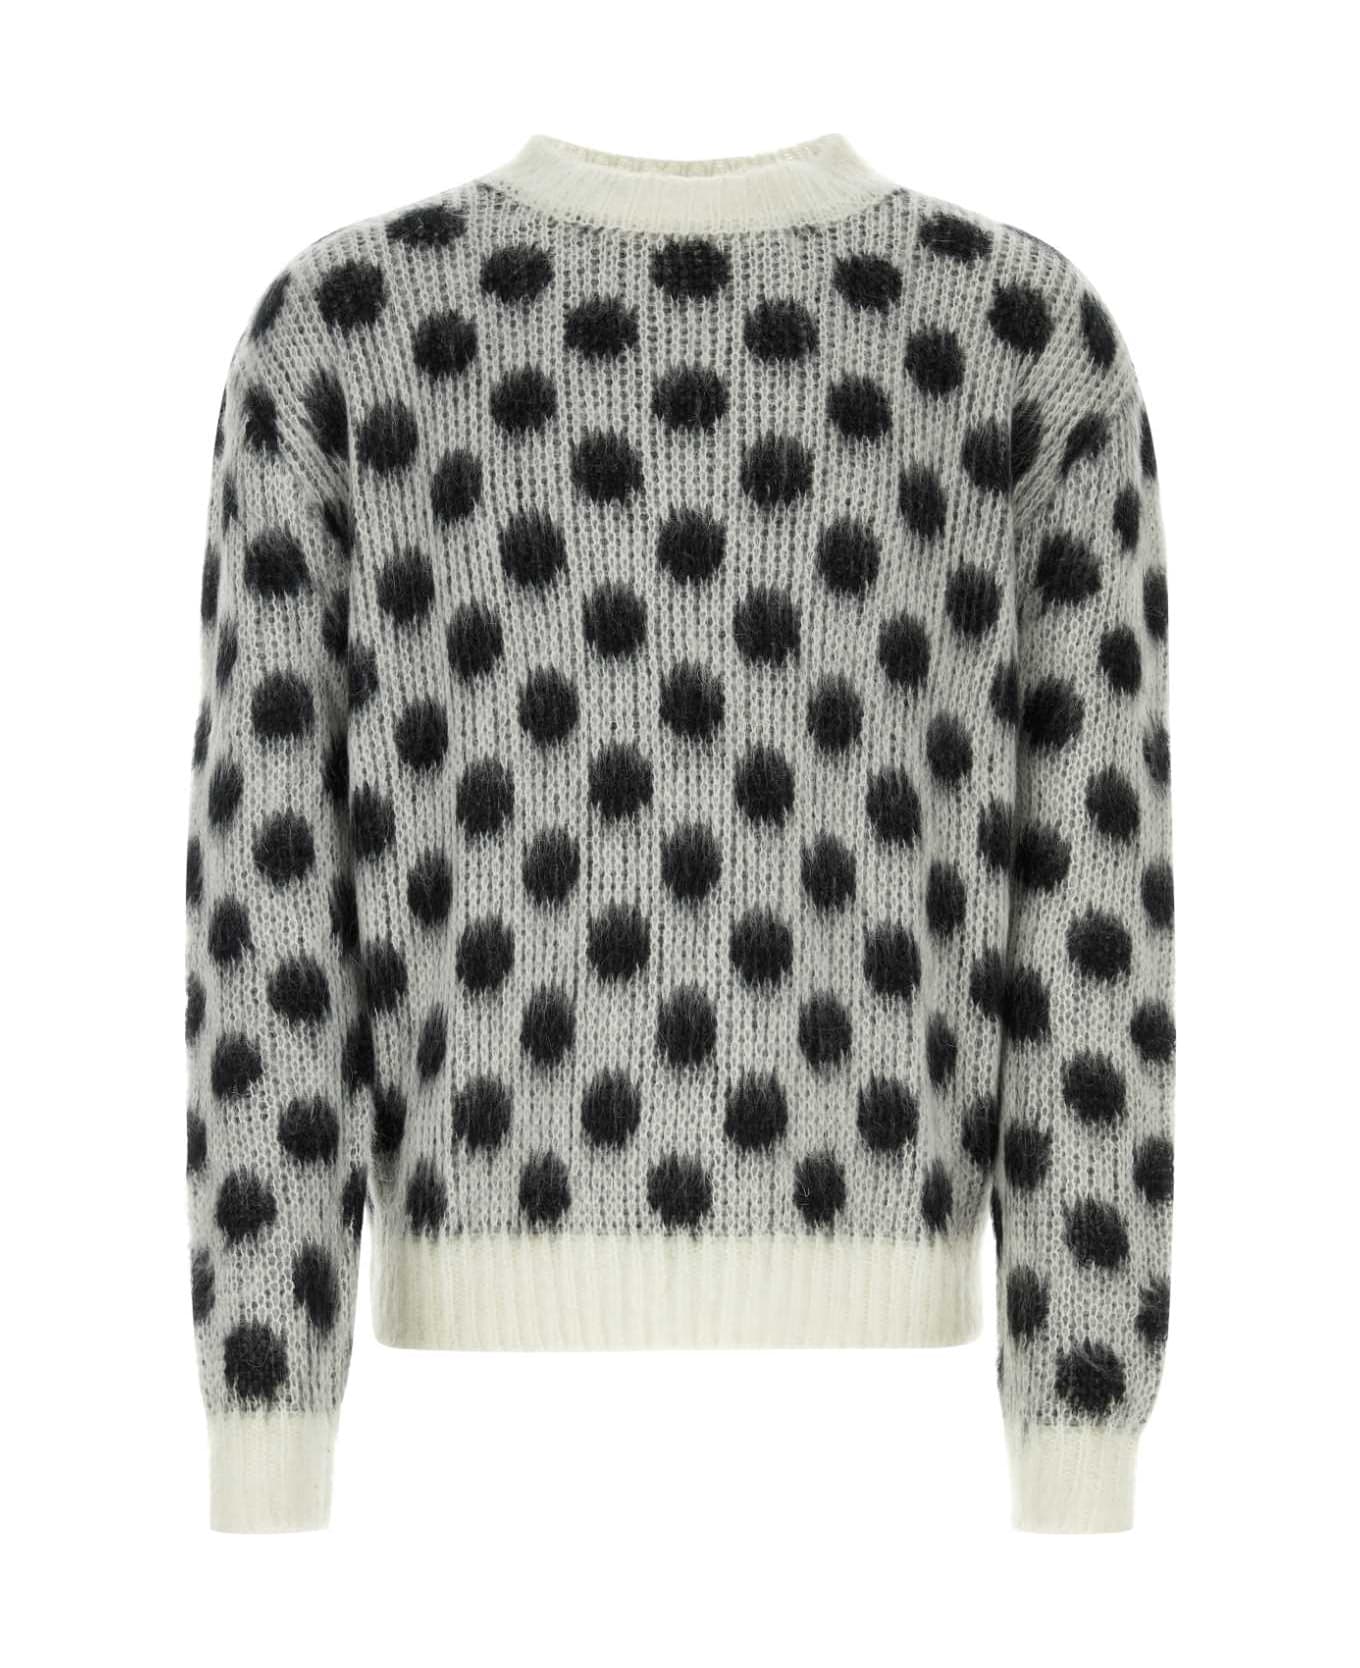 Marni Embroidered Acetate Blend Sweater - DOW01